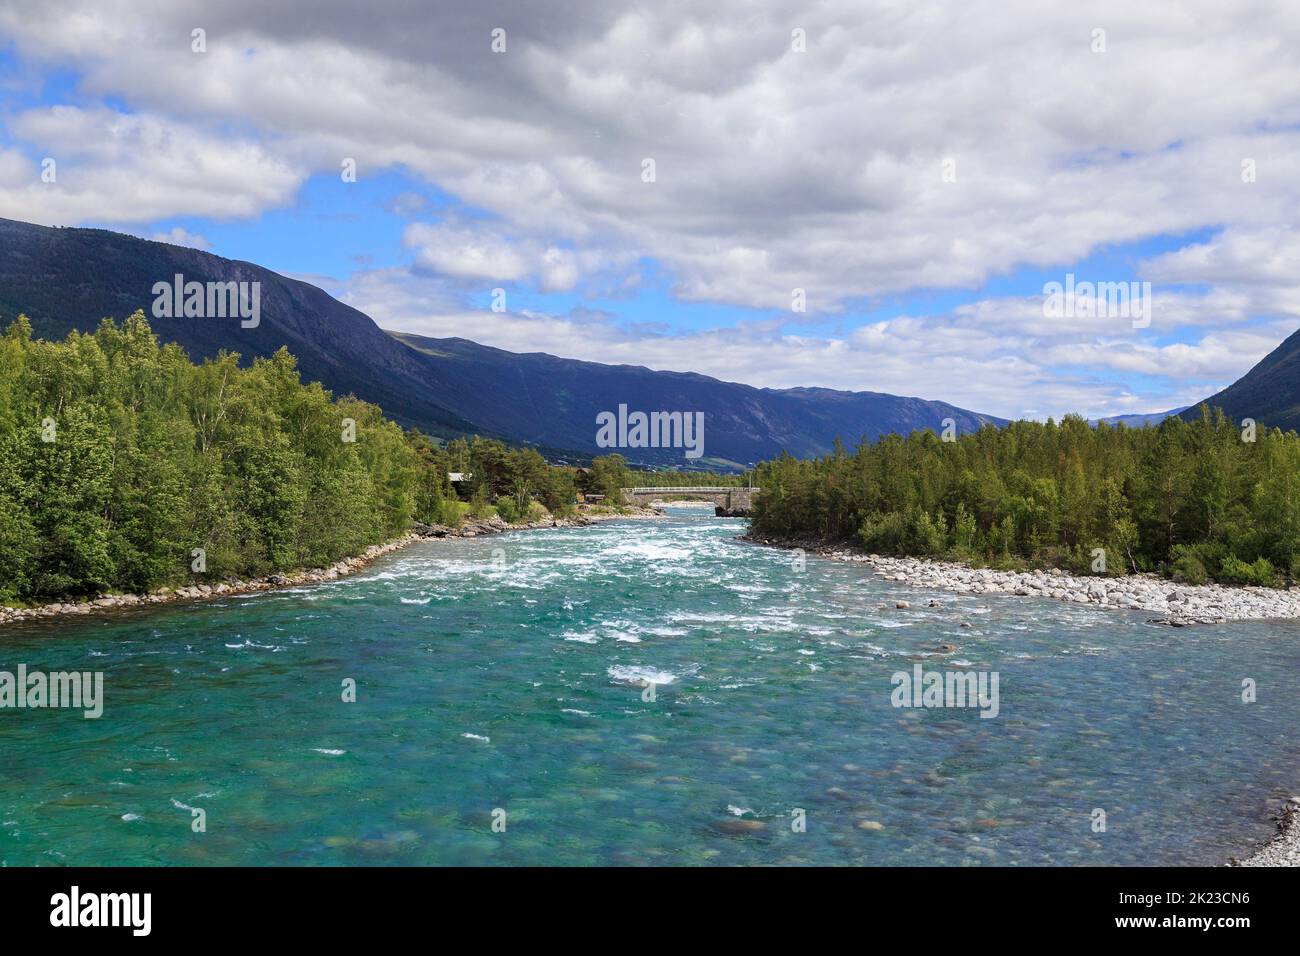 This is landscape along river Otta in the province of Oppland, Norway. Stock Photo